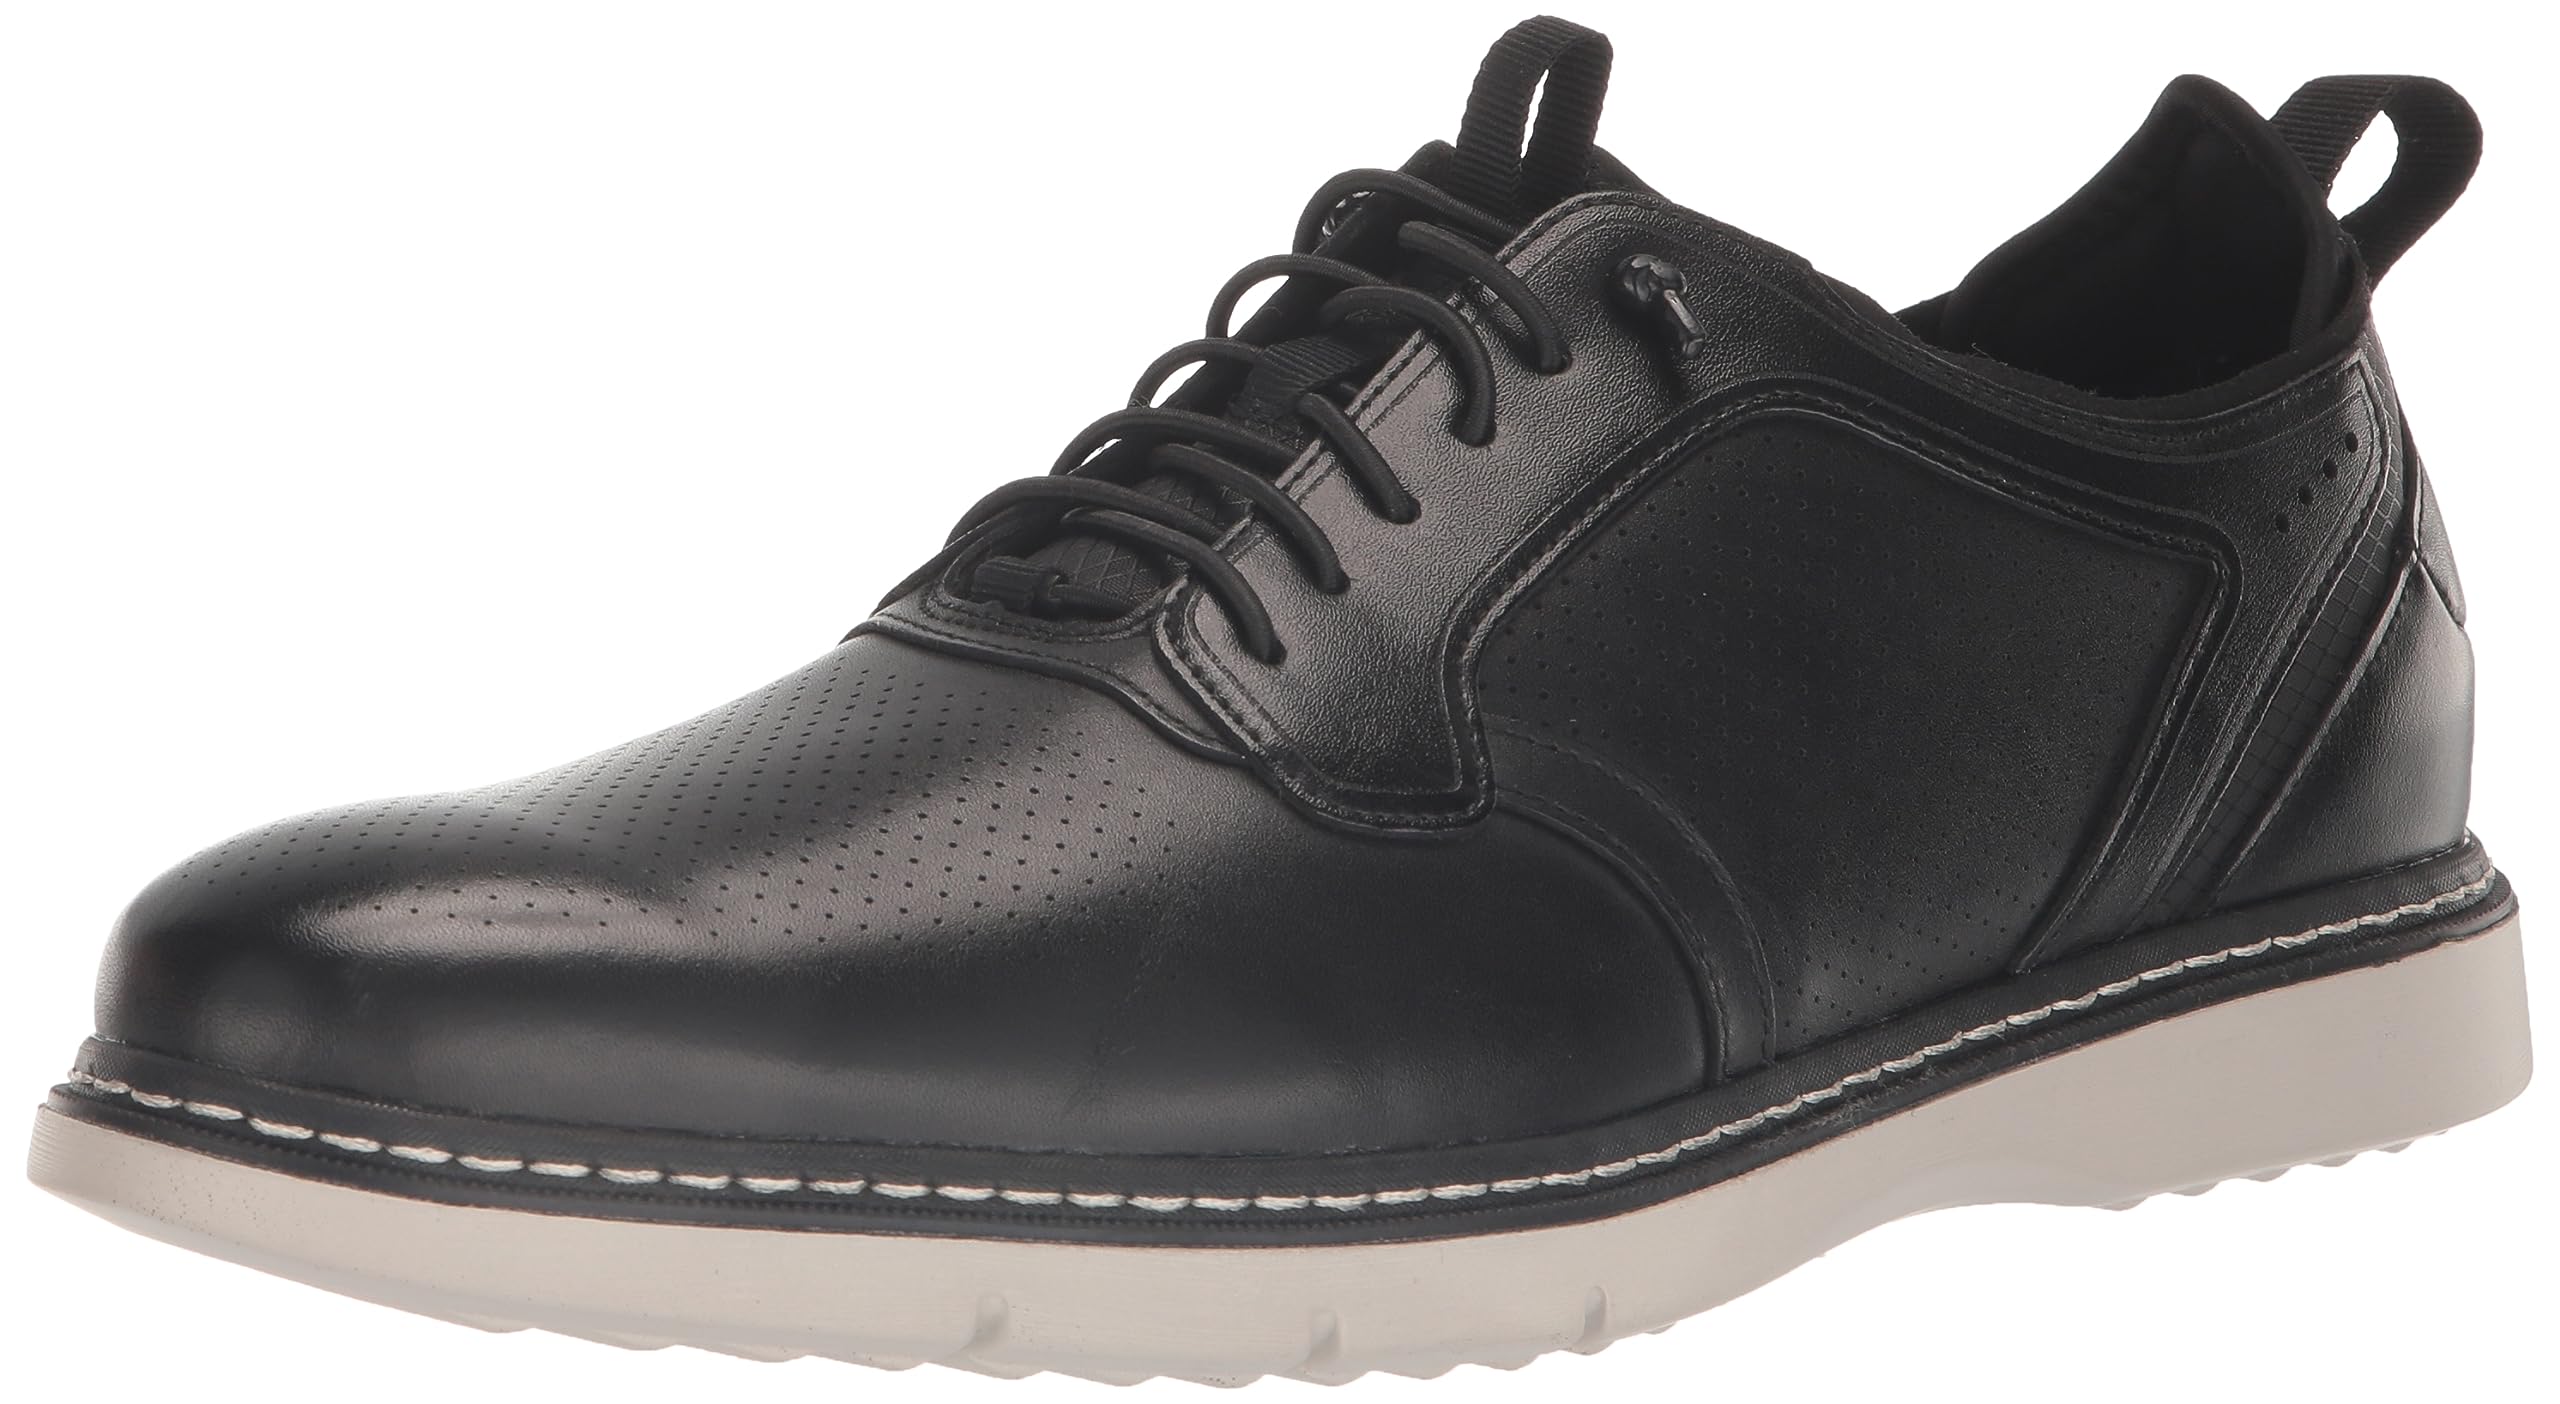 STACY ADAMS Men's Sync Lace Up Oxford